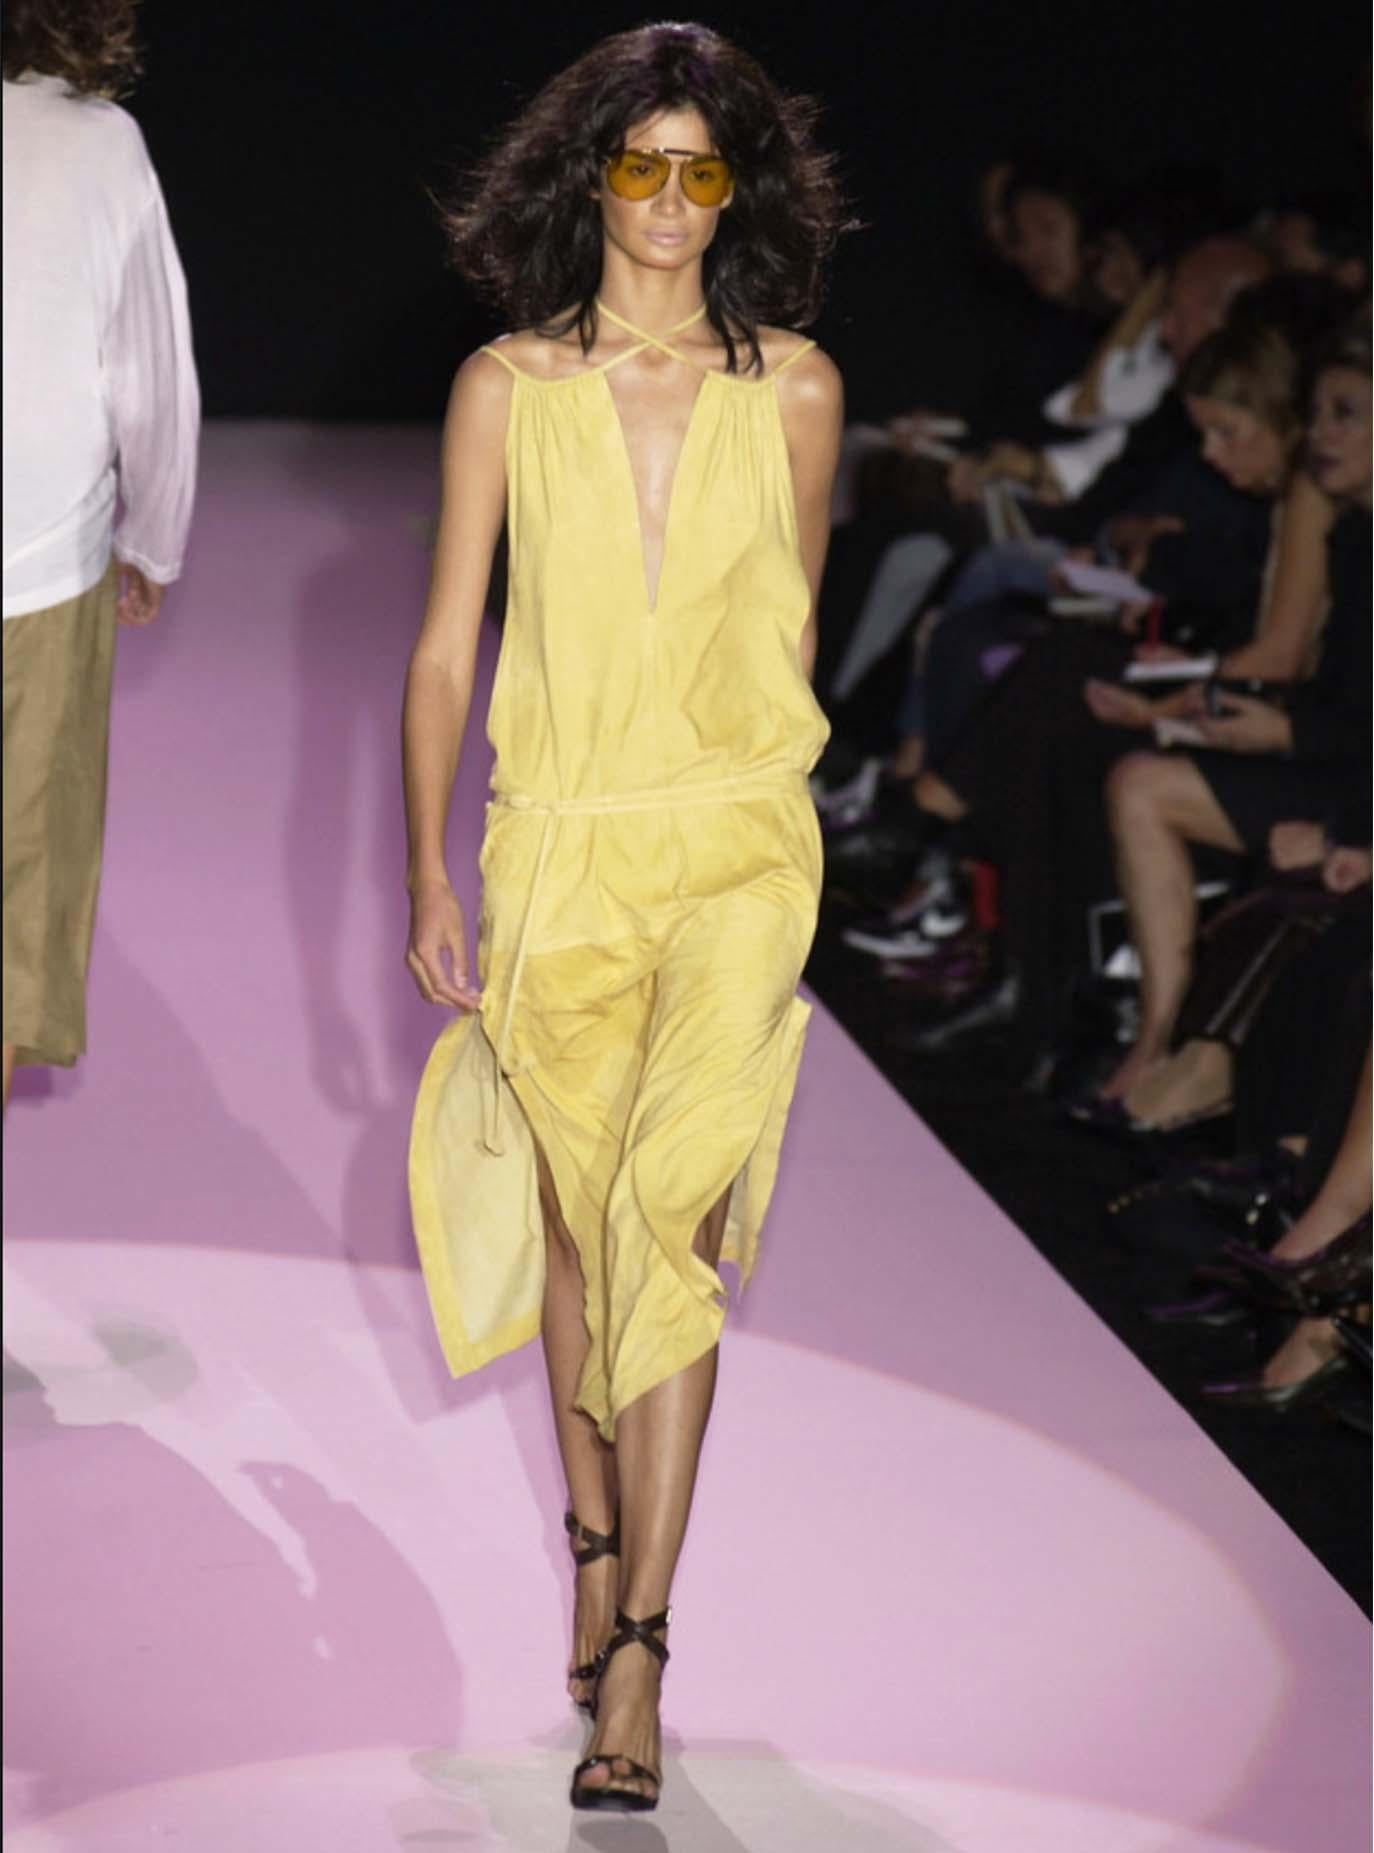 Presenting An absolutely fabulous tan suede dress from Gucci's Spring/Summer 2002 collection, designed by Tom Ford. Constructed purely of suede, this dress debuted on the season's runway and features a tie closure at the top as well as a suede